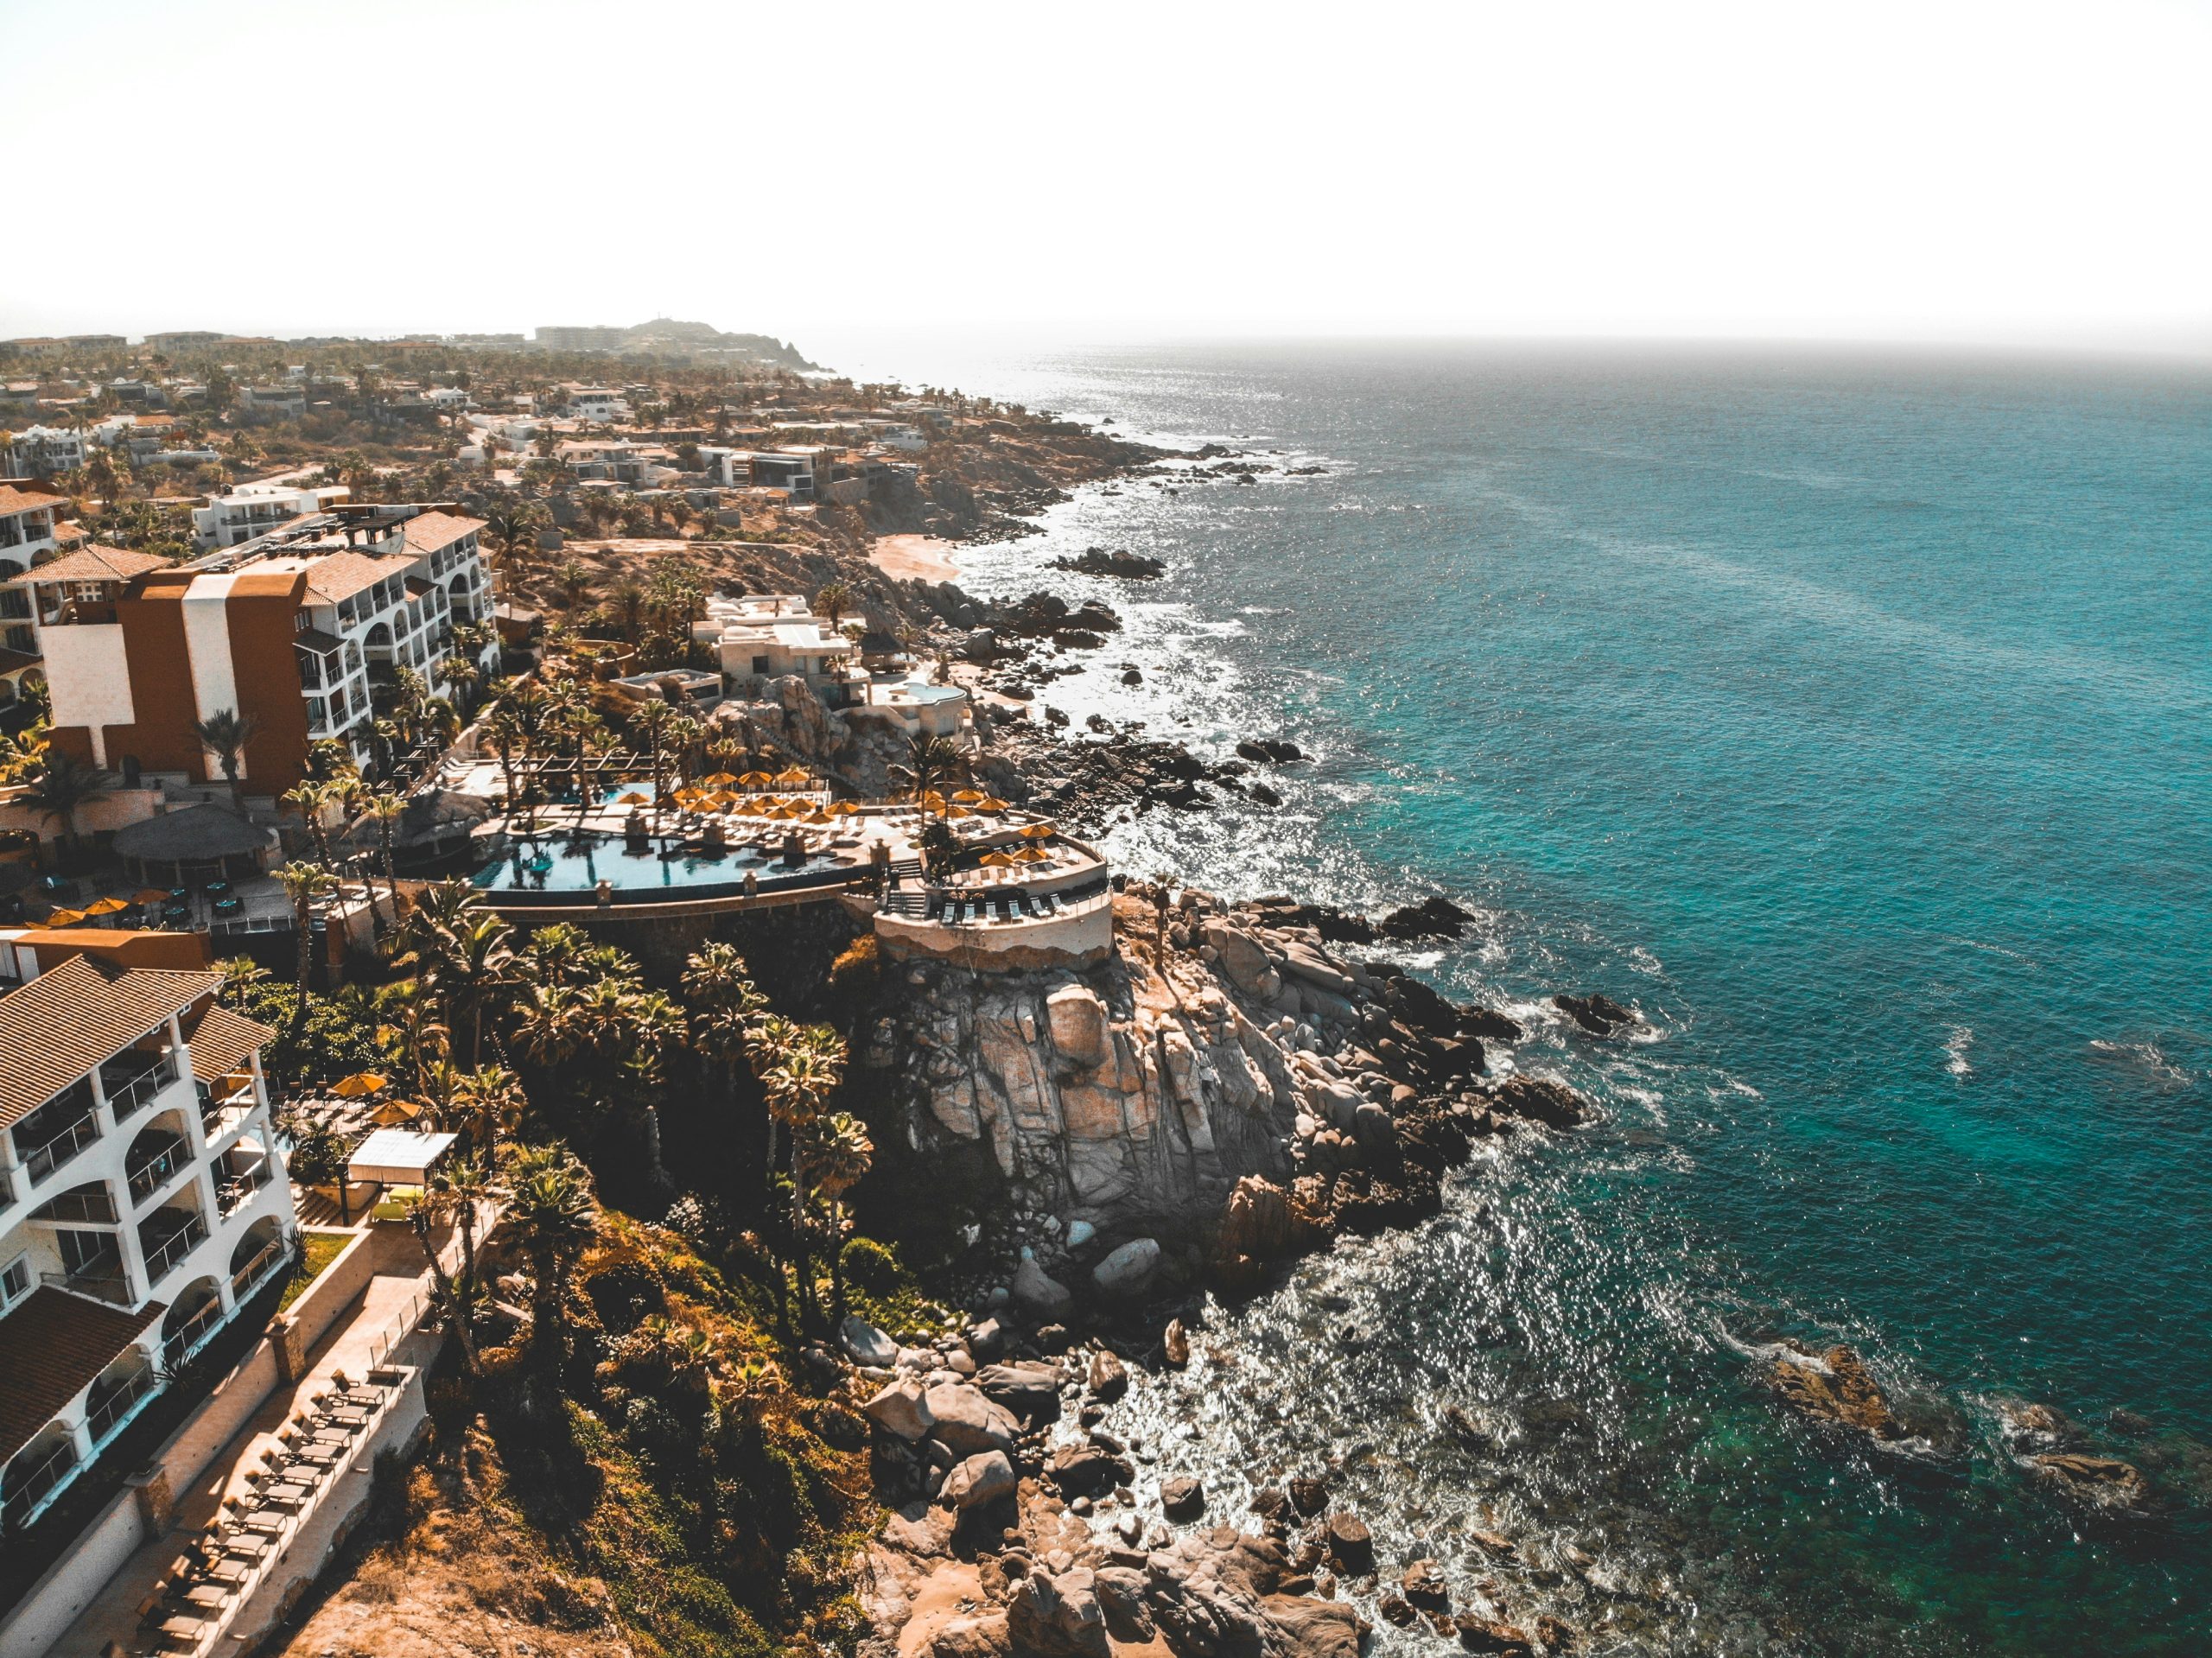 explore a world of coastal delights and discover the beauty of seaside living with our exclusive collection of beachfront destinations and ocean-inspired experiences.